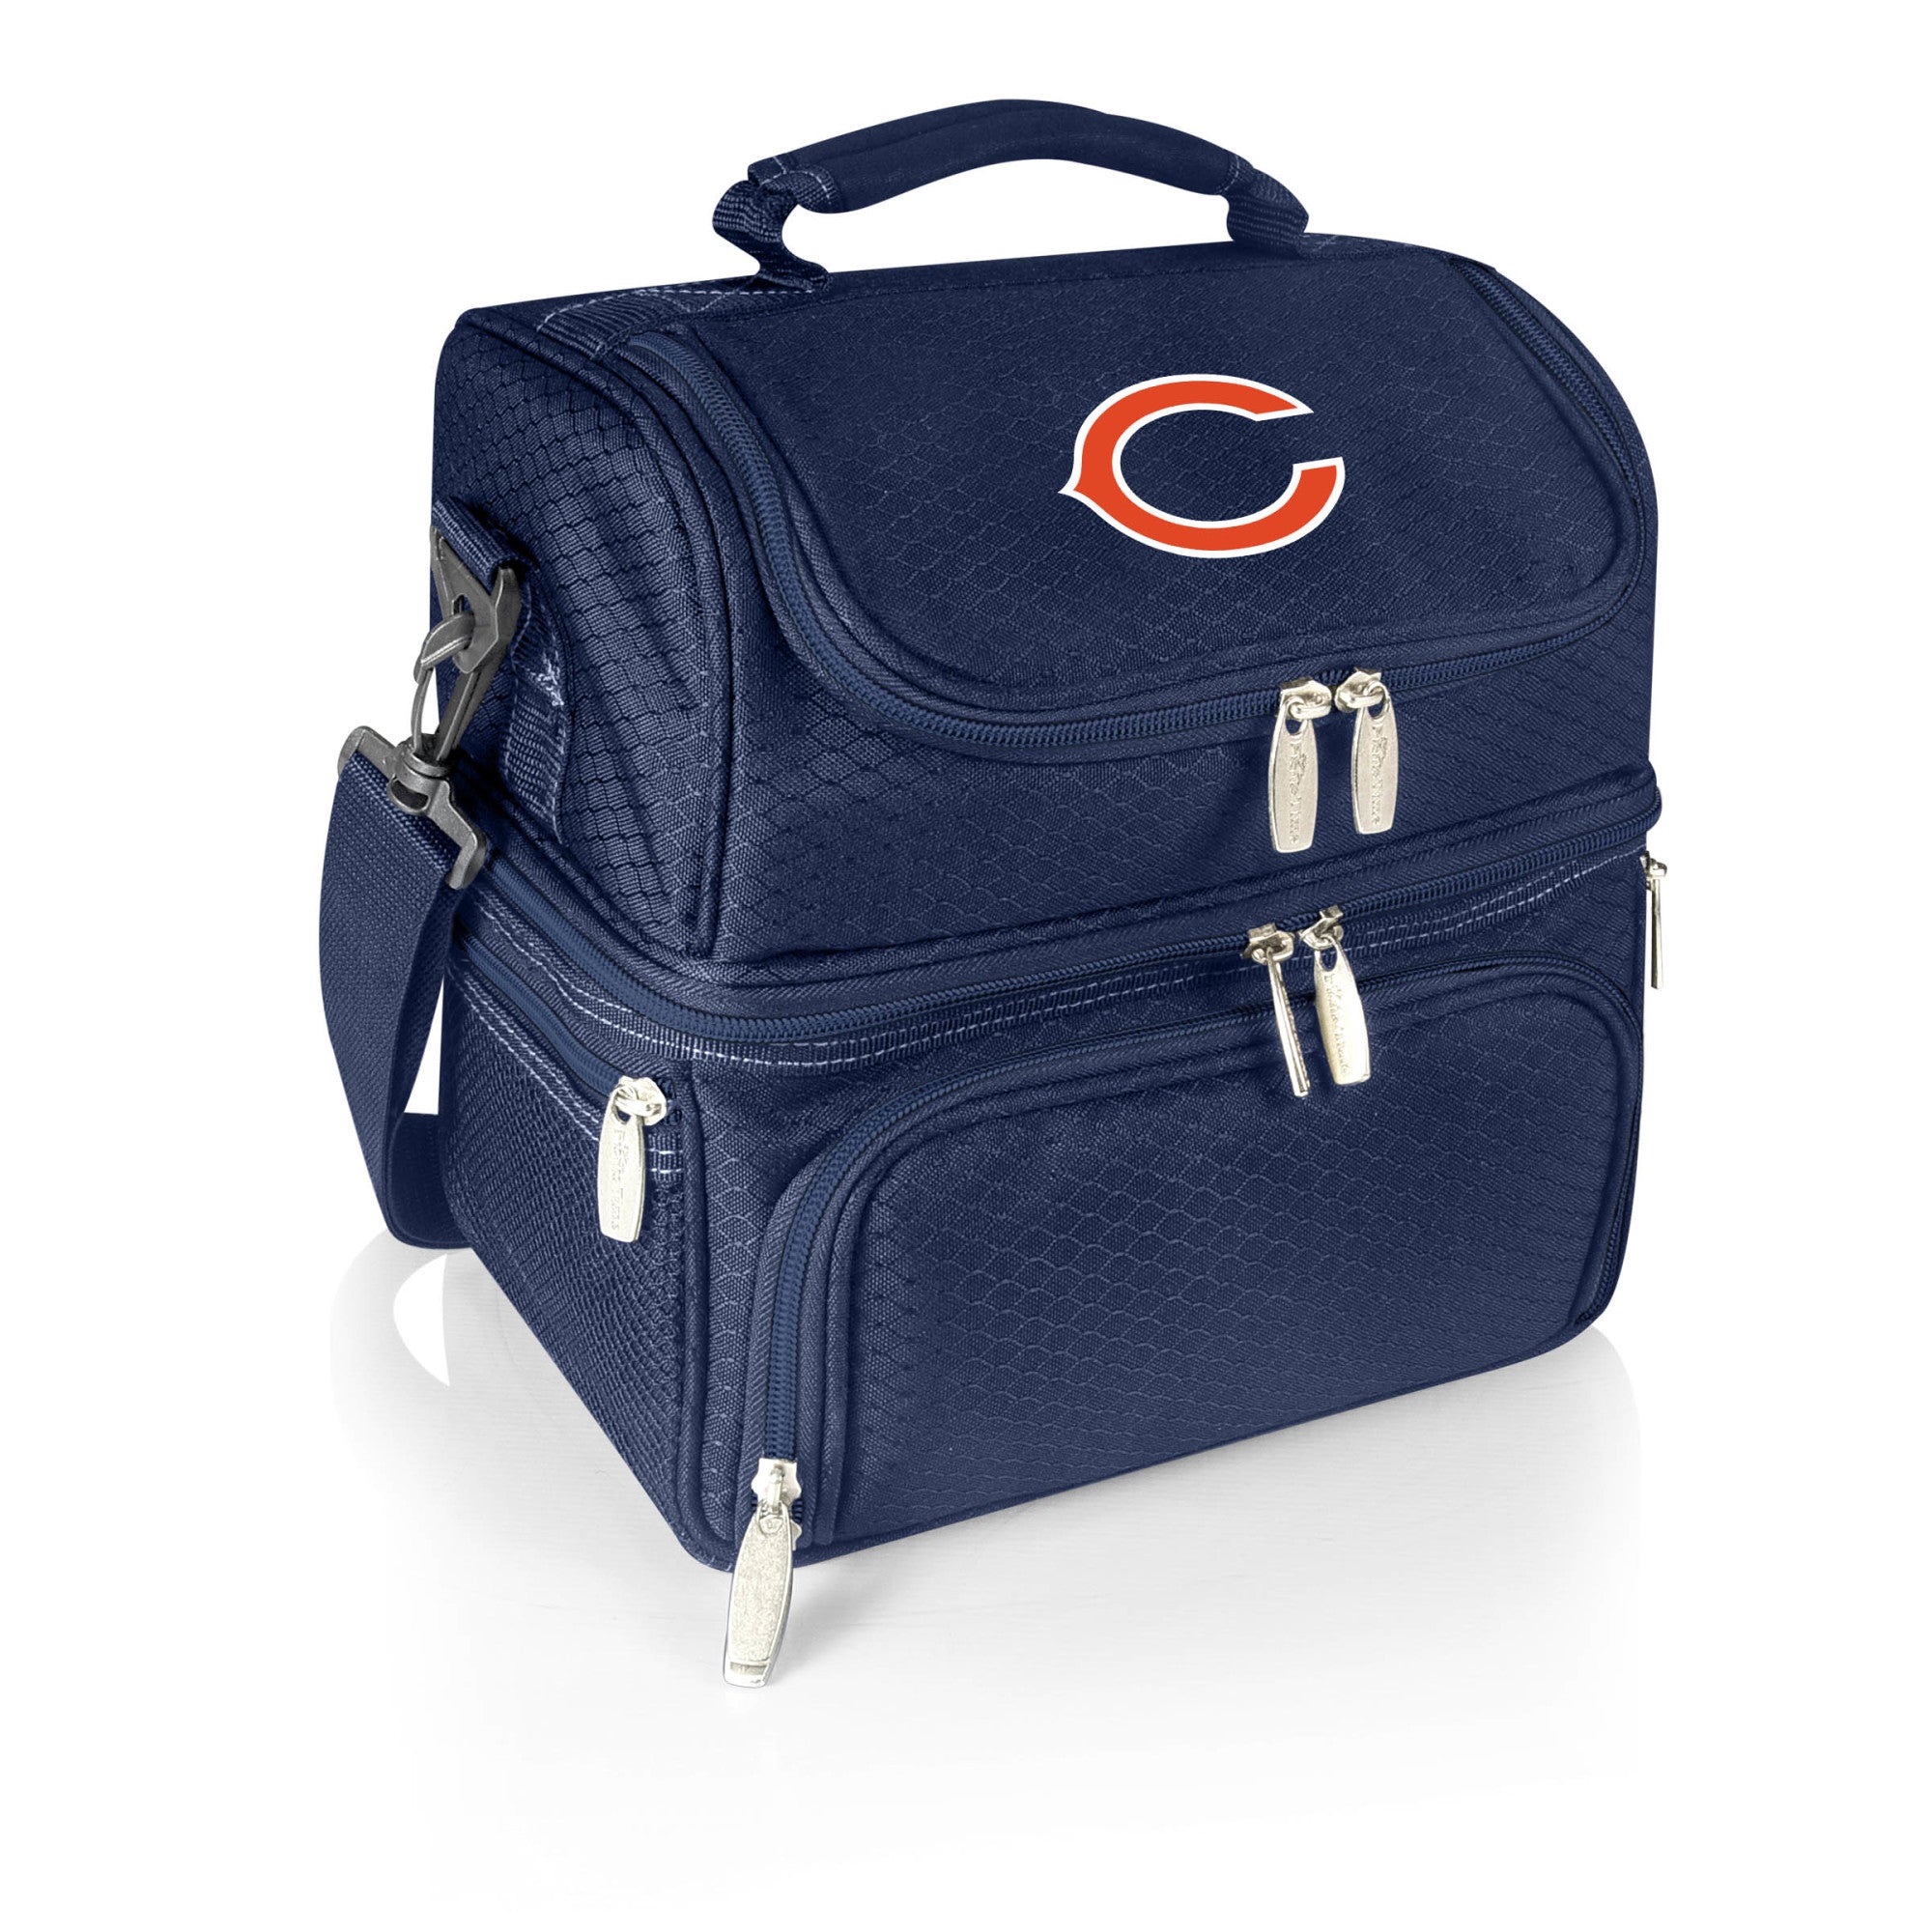 Chicago Bears - Pranzo Lunch Bag Cooler with Utensils